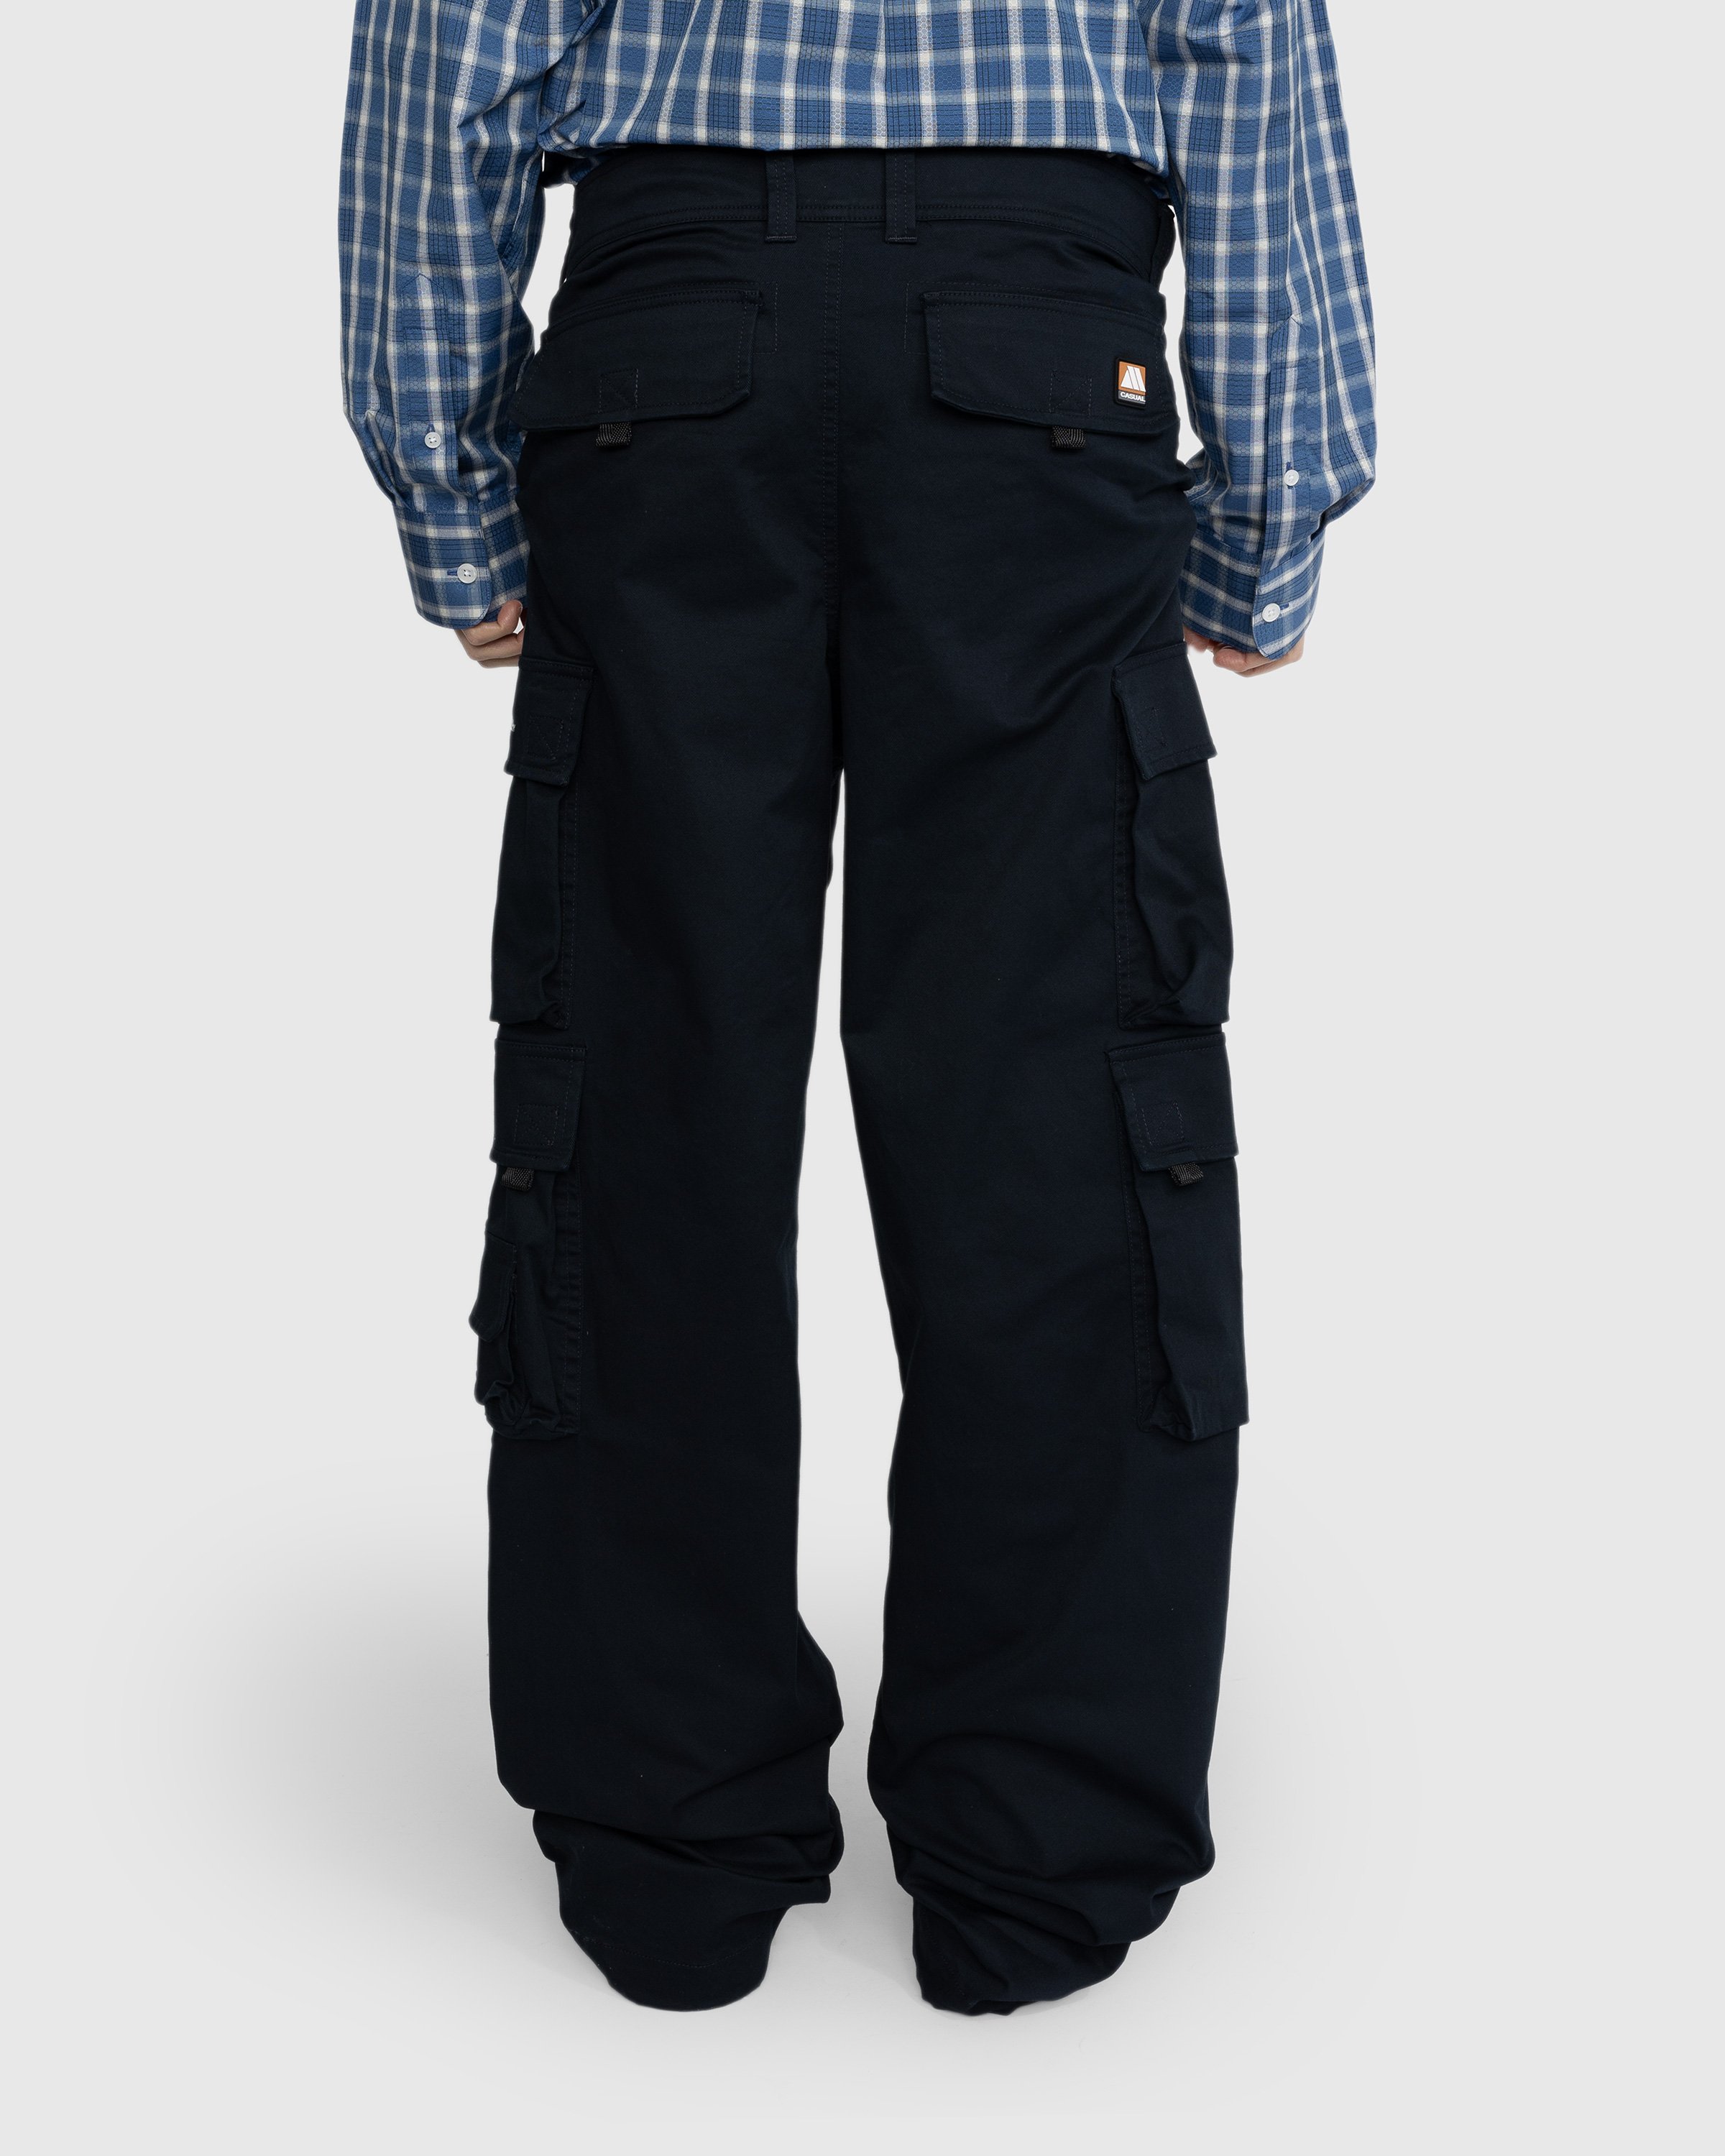 Martine Rose - Pulled Cargo Trouser Navy - Clothing - Blue - Image 3